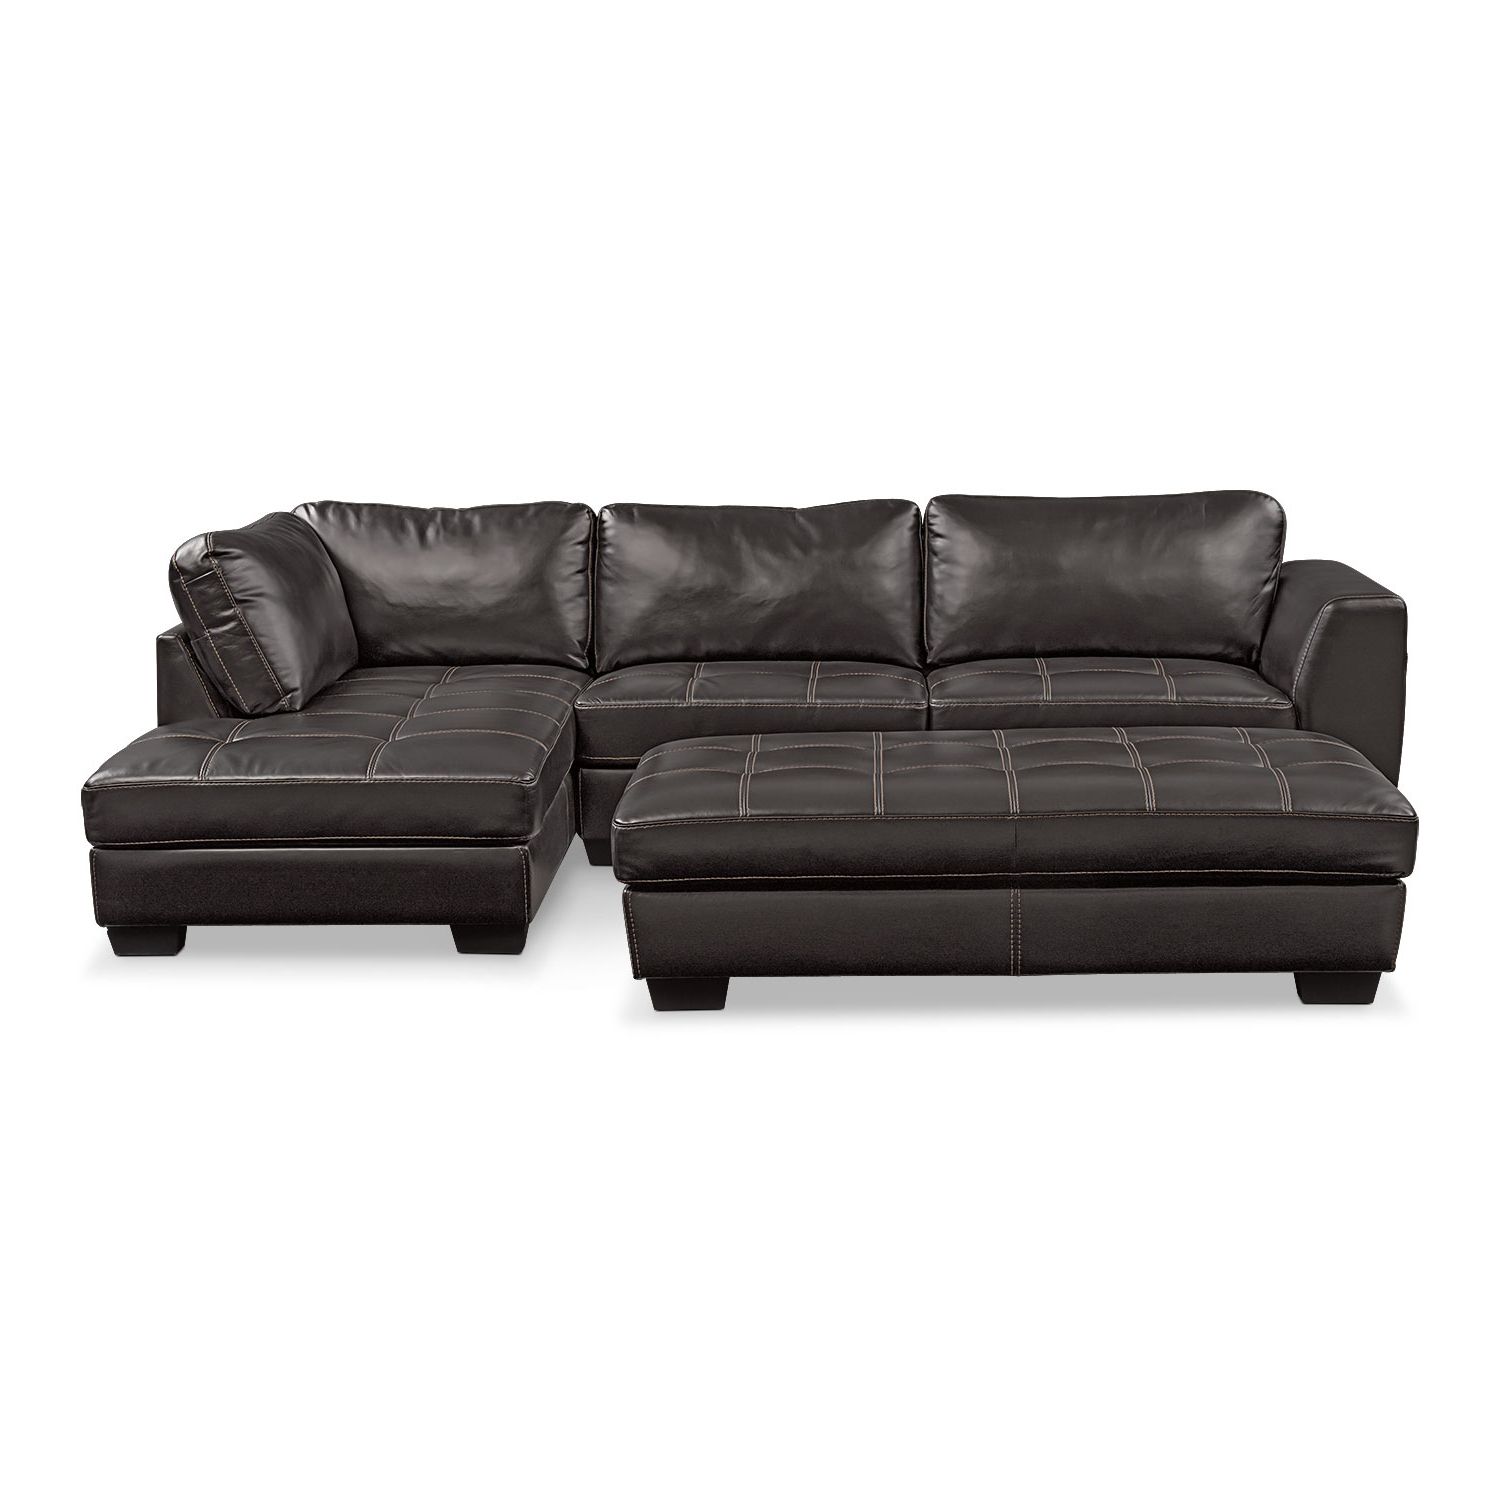 Arrowmask 2 Piece Sectionals With Sleeper & Left Facing Chaise In 2019 Santana 2 Piece Sectional With Right Facing Chaise And Cocktail (View 15 of 20)